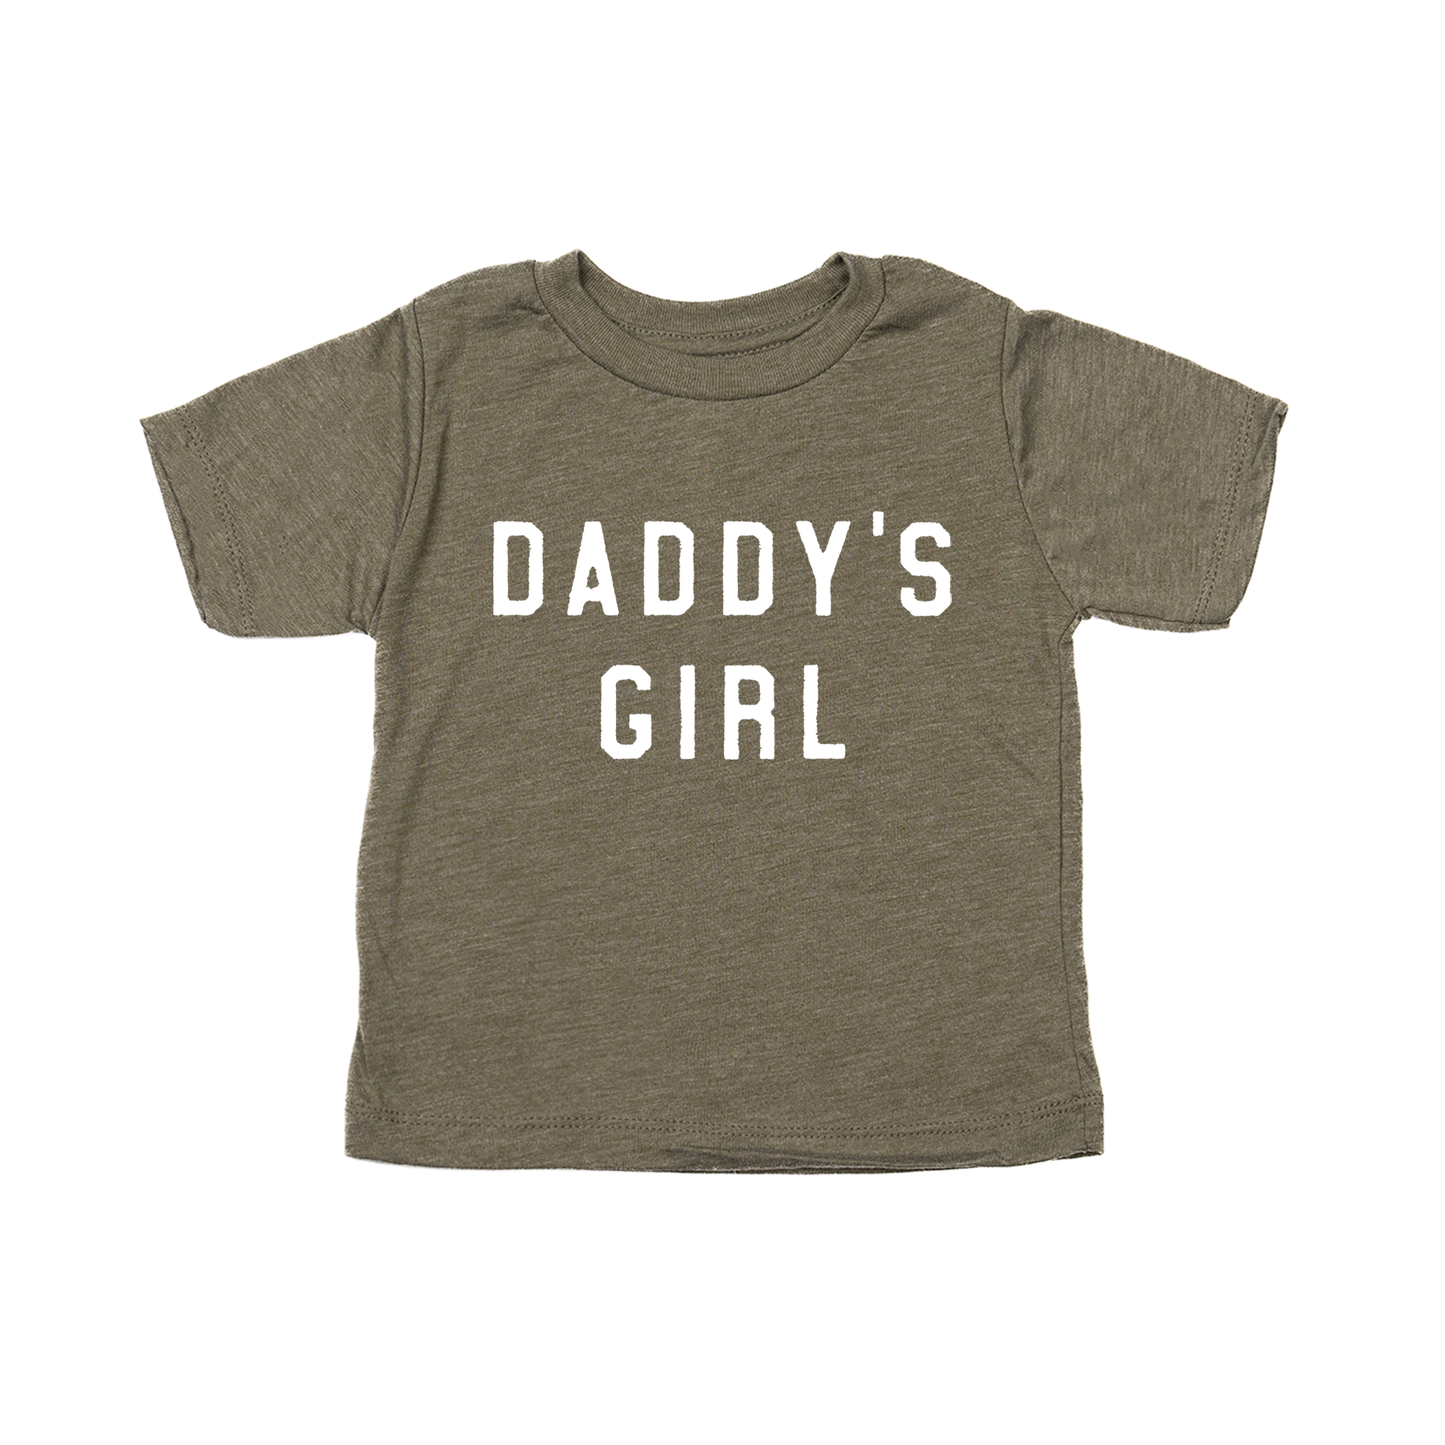 Daddy's Girl (White) - Kids Tee (Olive)